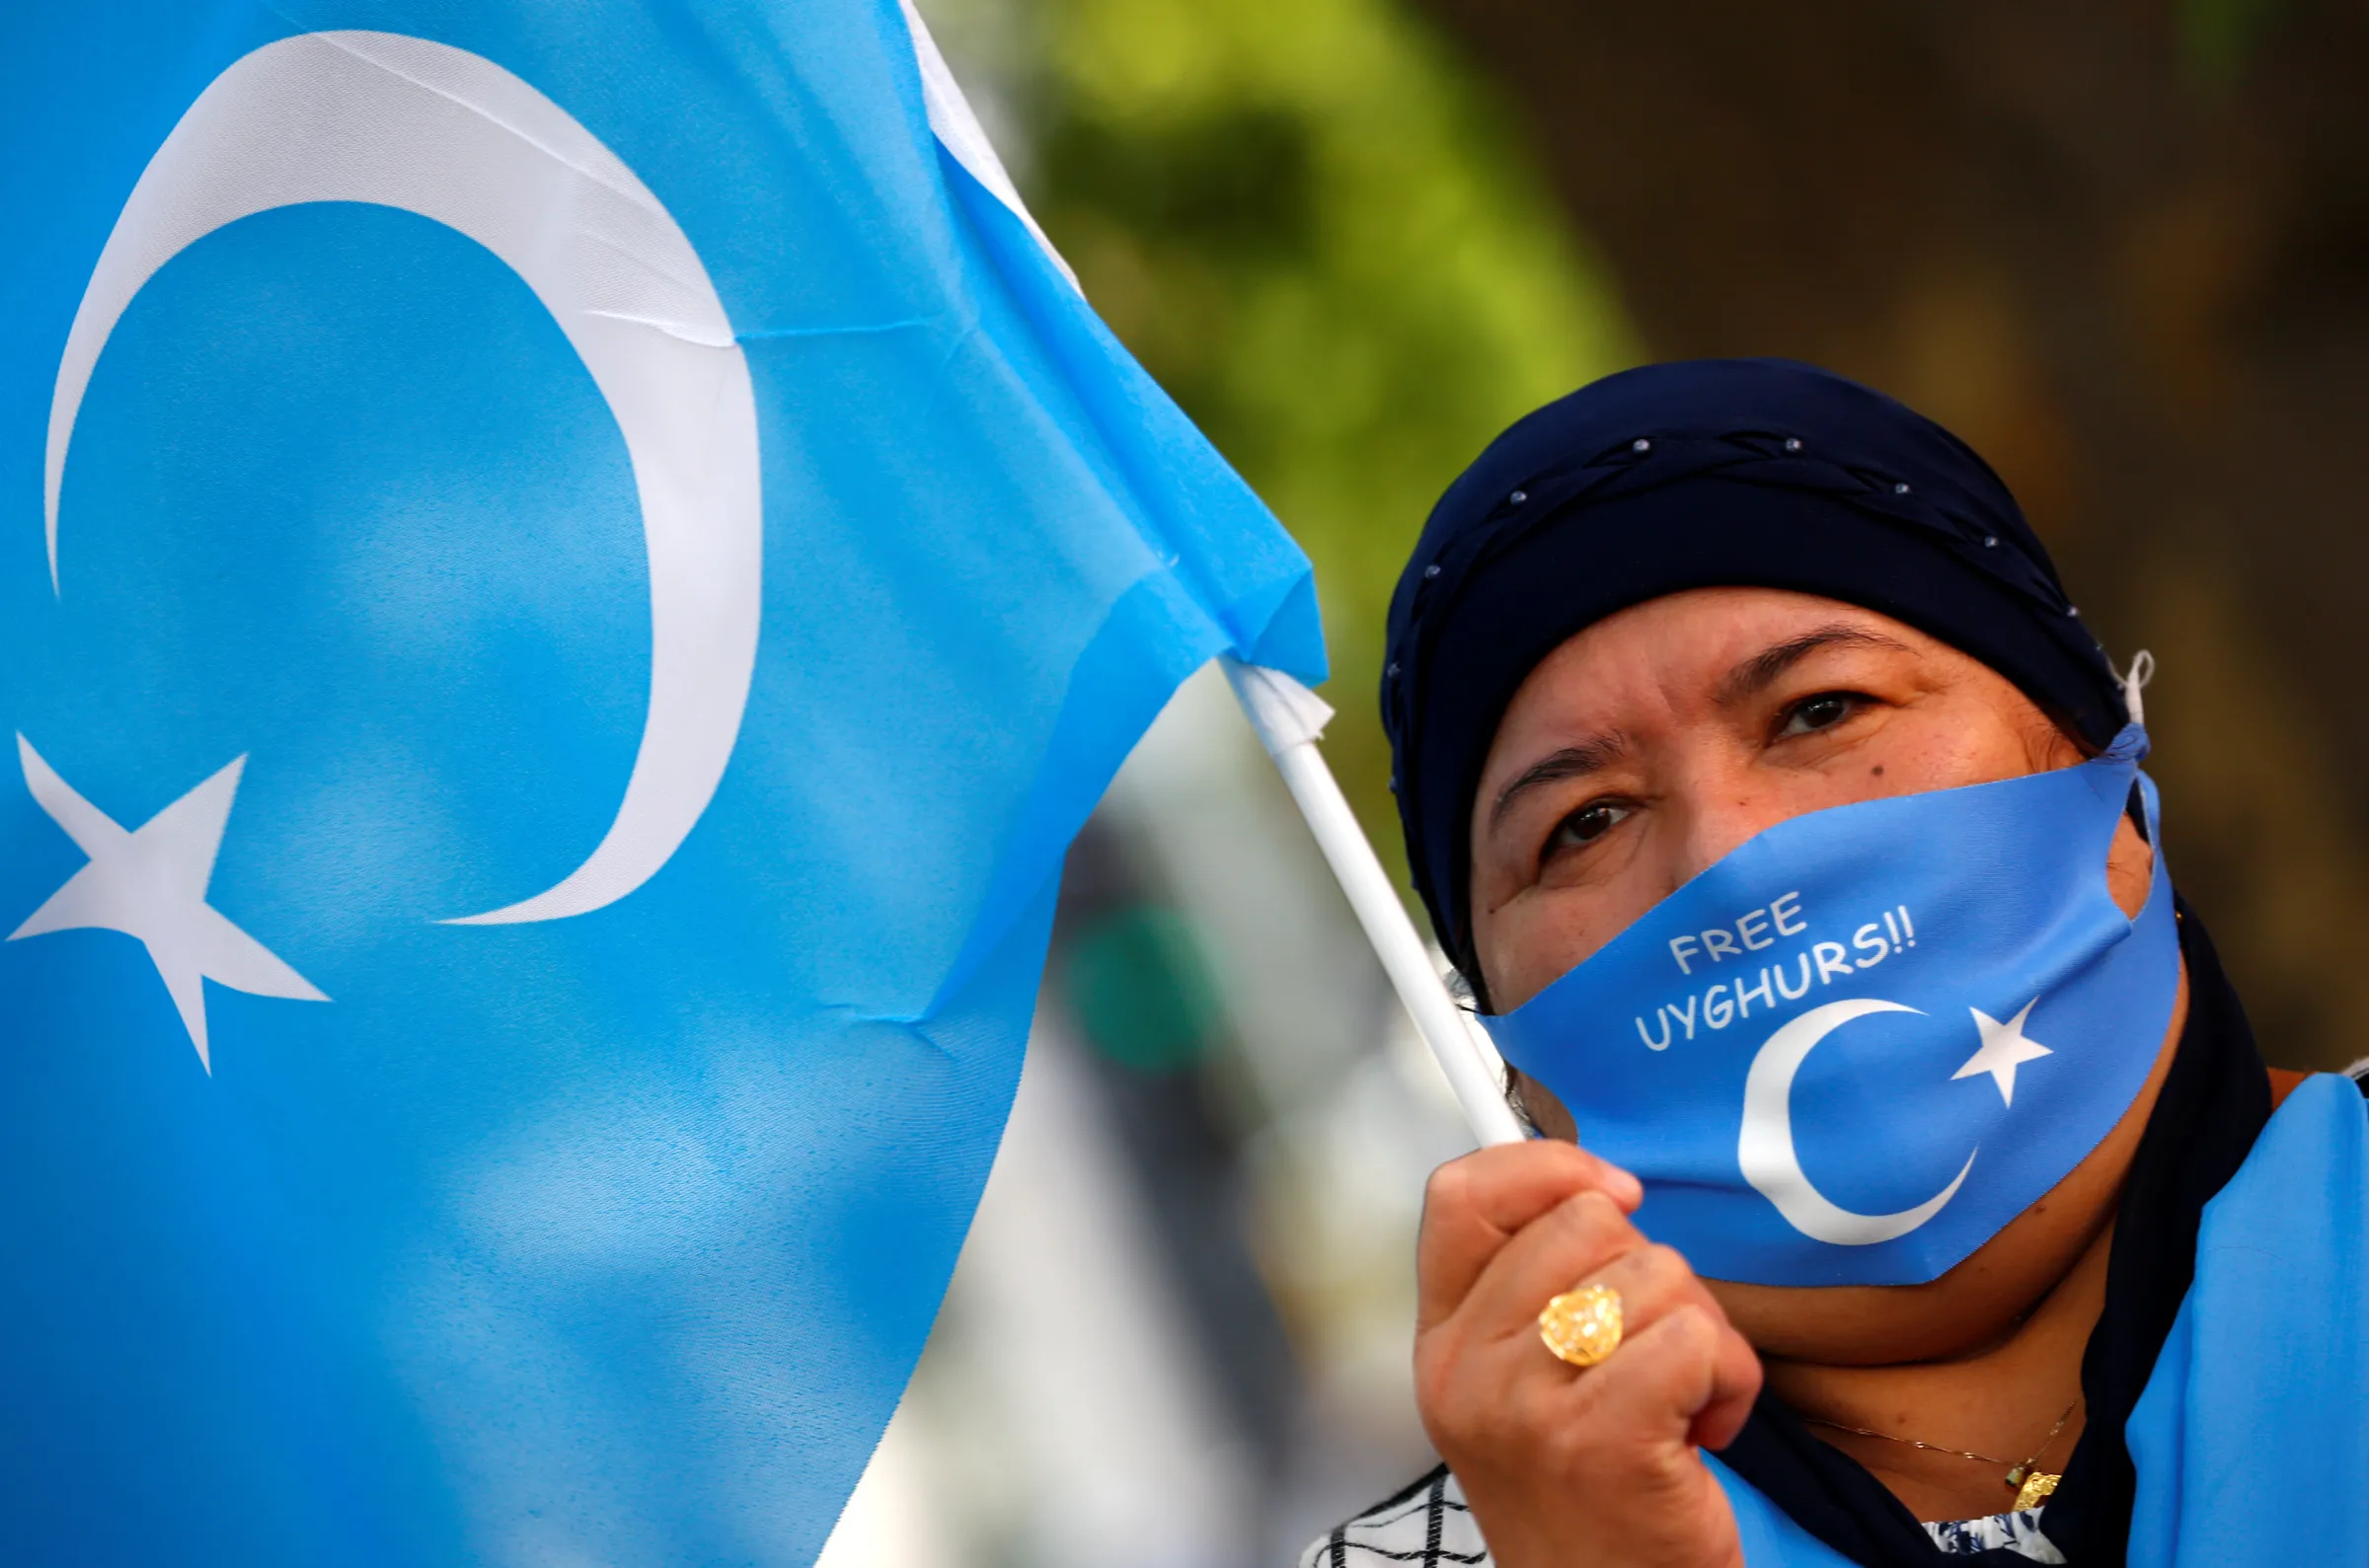 A woman holds a Uyghur flag and wears a Uyghur flag mask, where you can read "FREE UYGHURS" at a rally